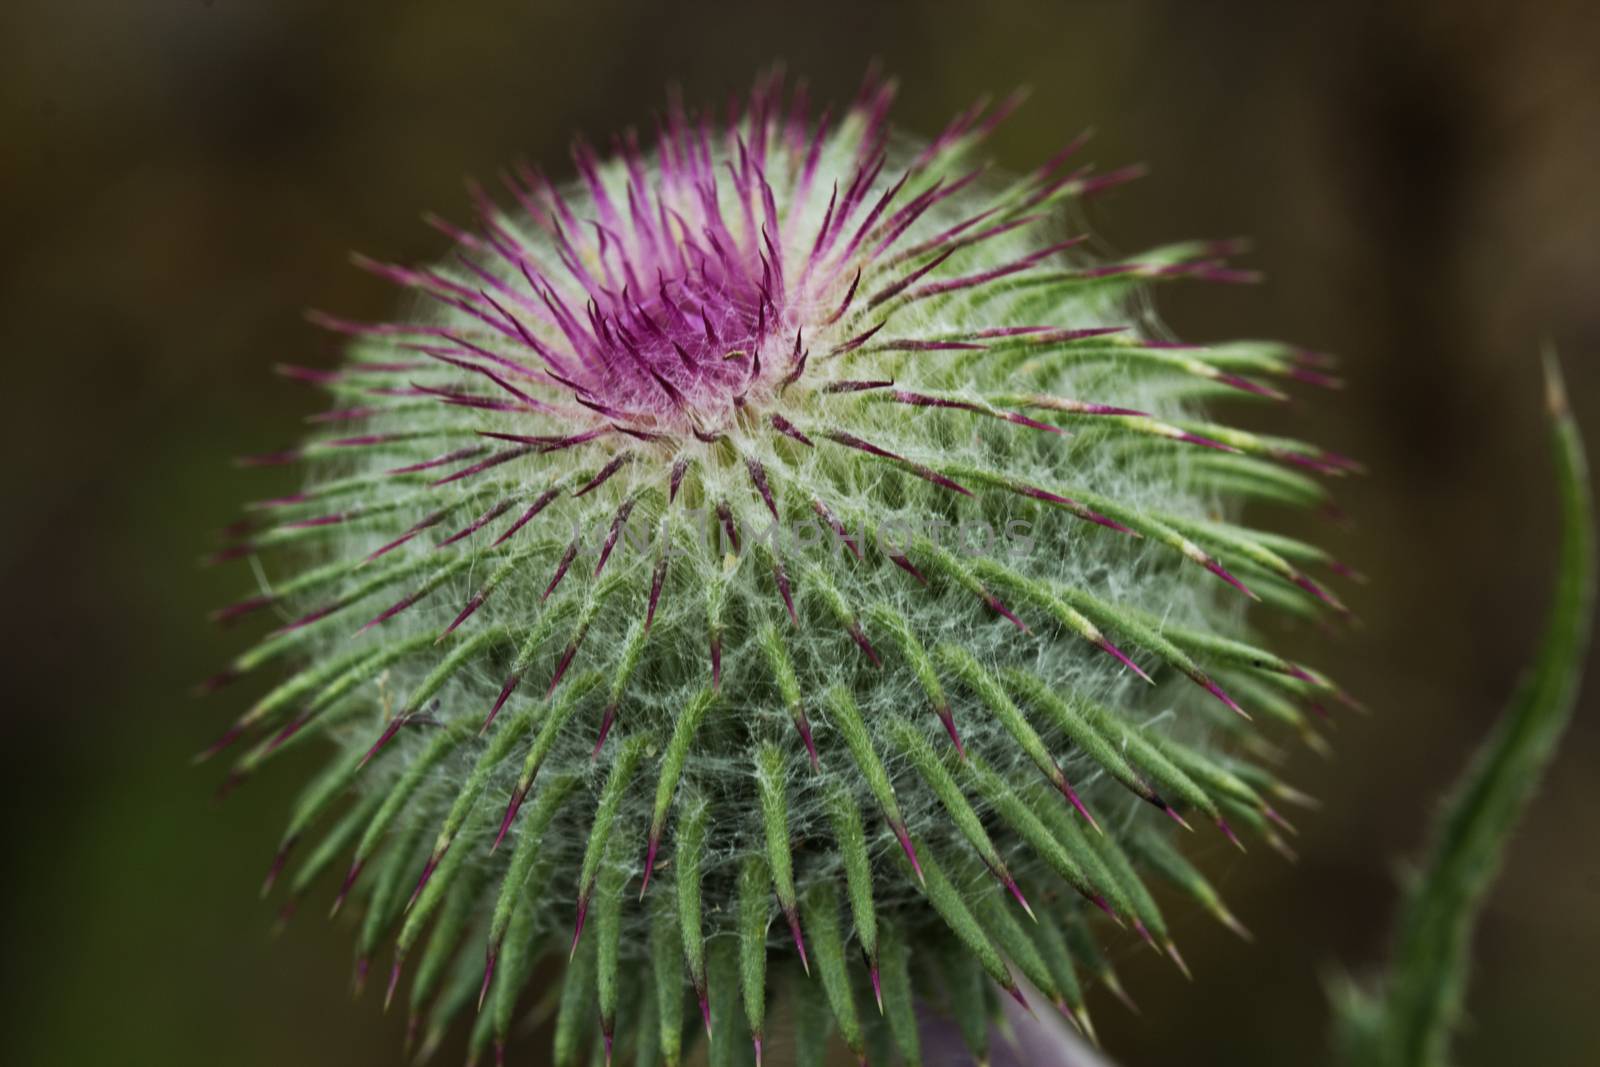 Close up image showing the purple flower of a milk thistle which is a celtic symbol of nobility.